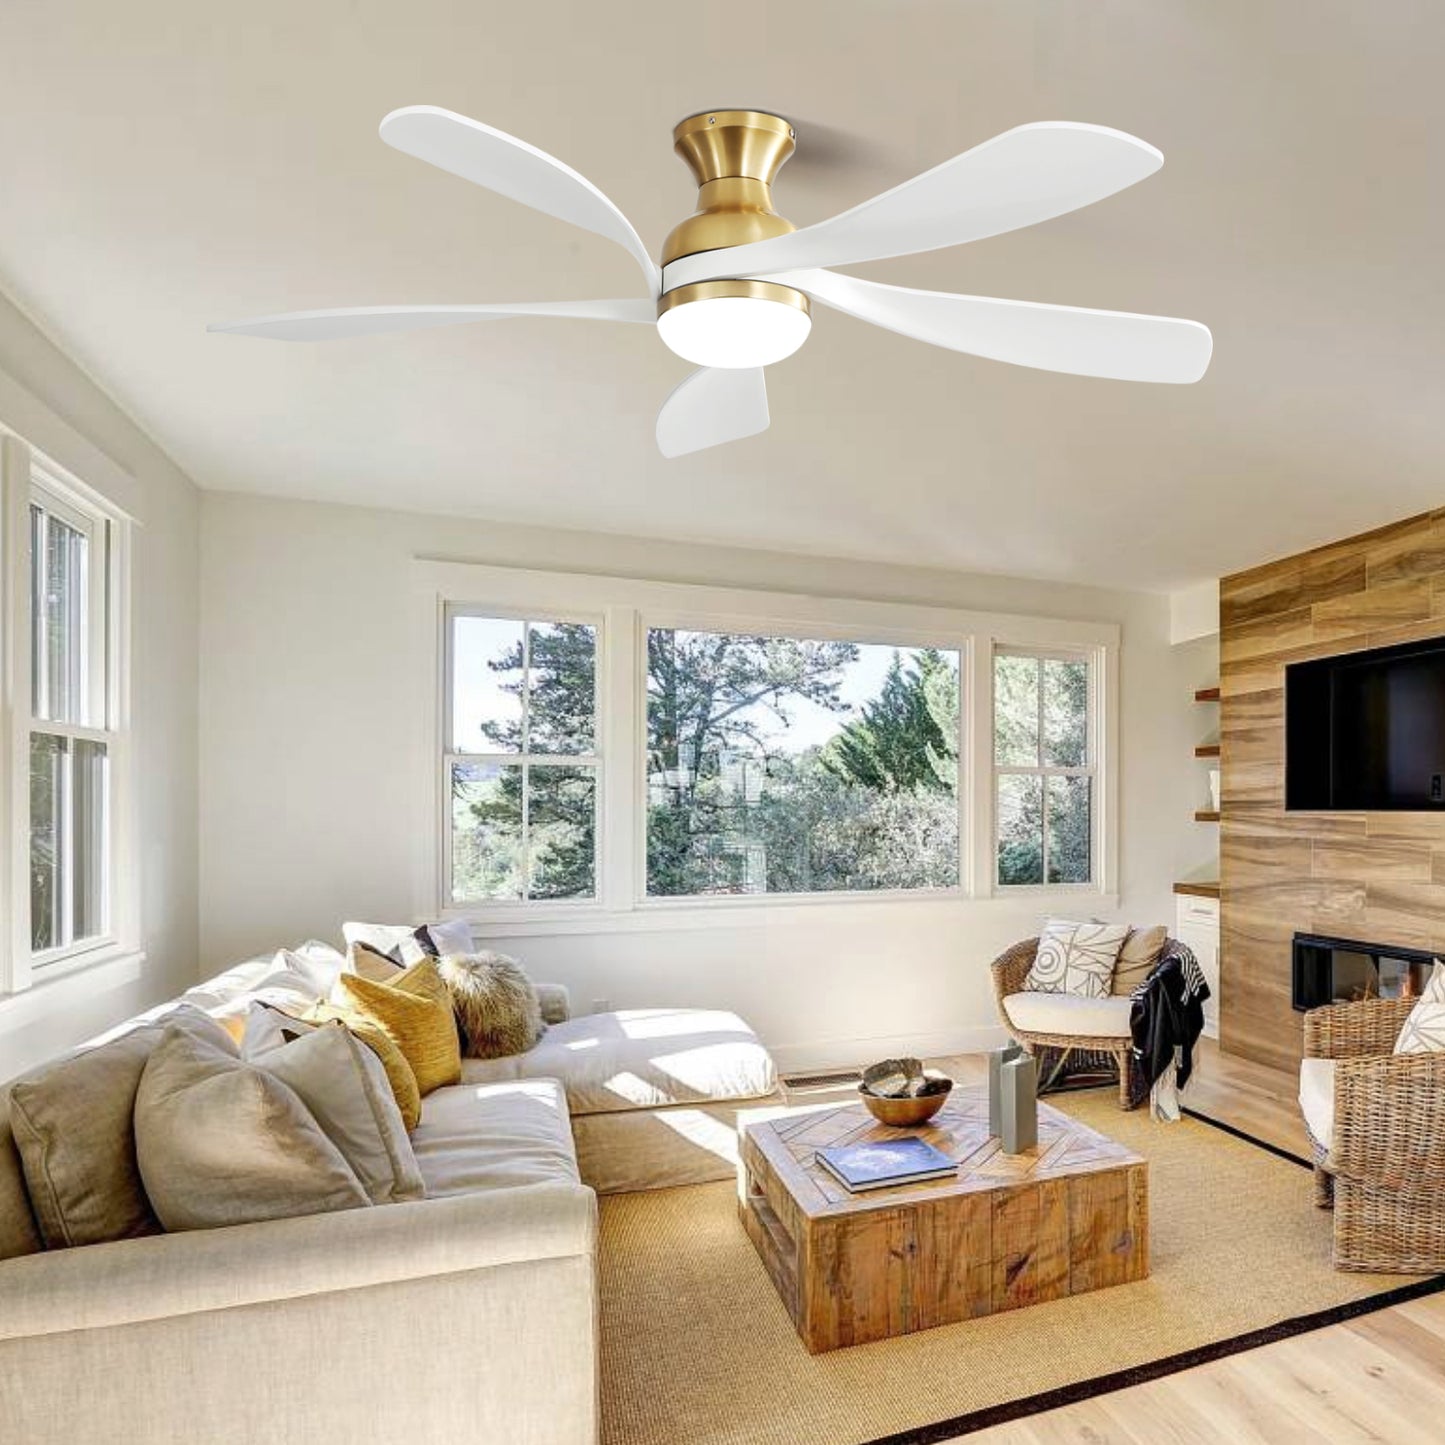 52 Modern Ceiling Fan with Dimmable LED Light and Reversible DC Motor